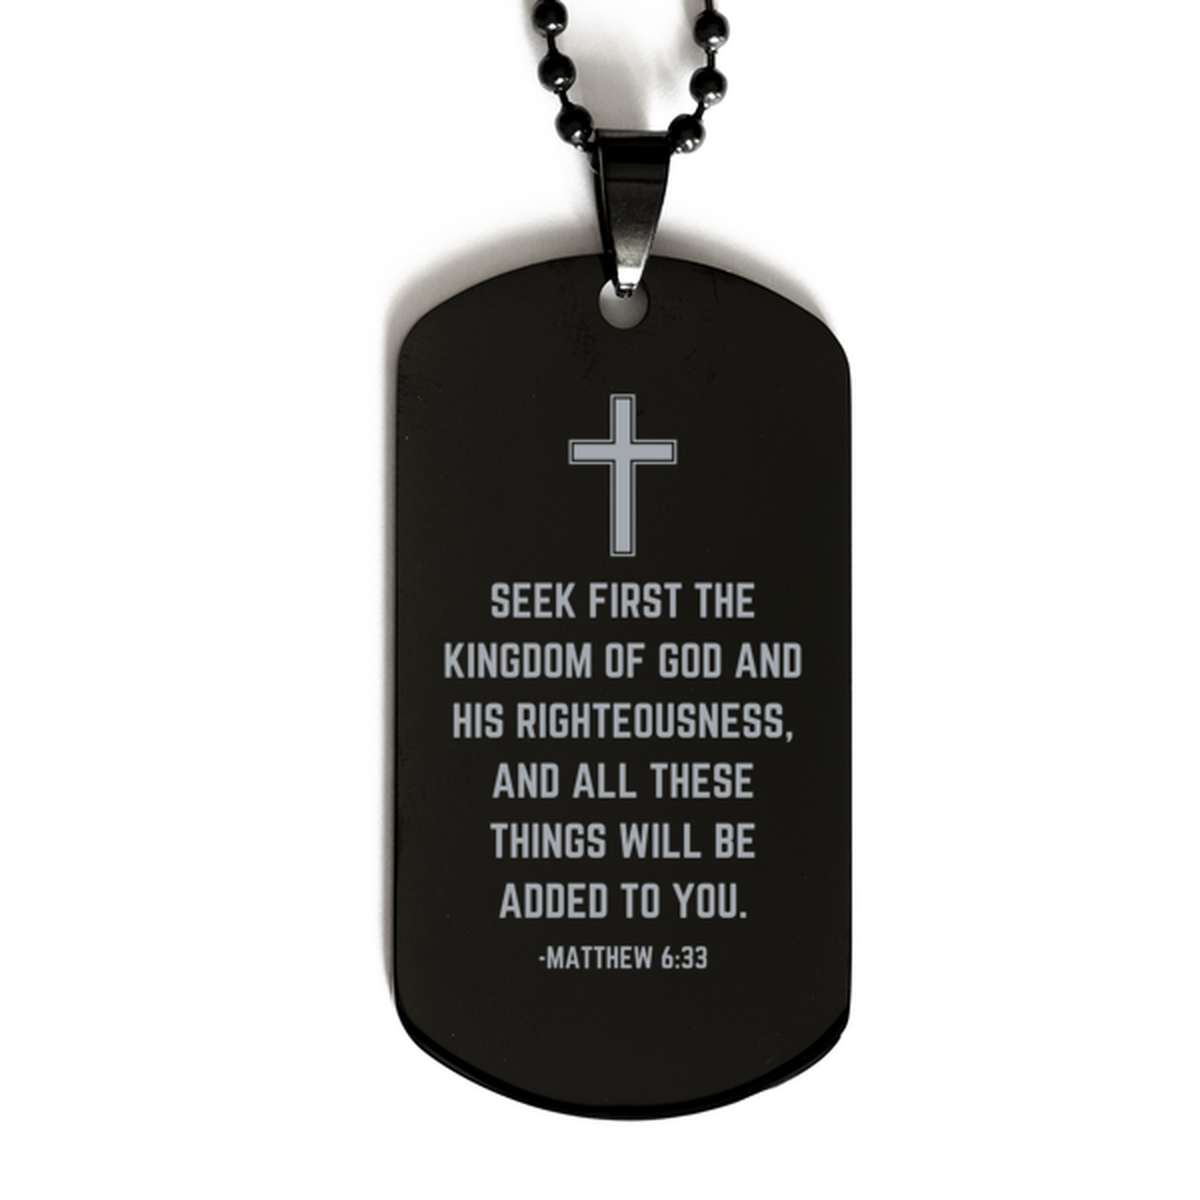 Baptism Gifts For Teenage Boys Girls, Christian Bible Verse Black Dog Tag, Seek first the kingdom of God, Confirmation Gifts, Bible Verse Necklace for Son, Godson, Grandson, Nephew